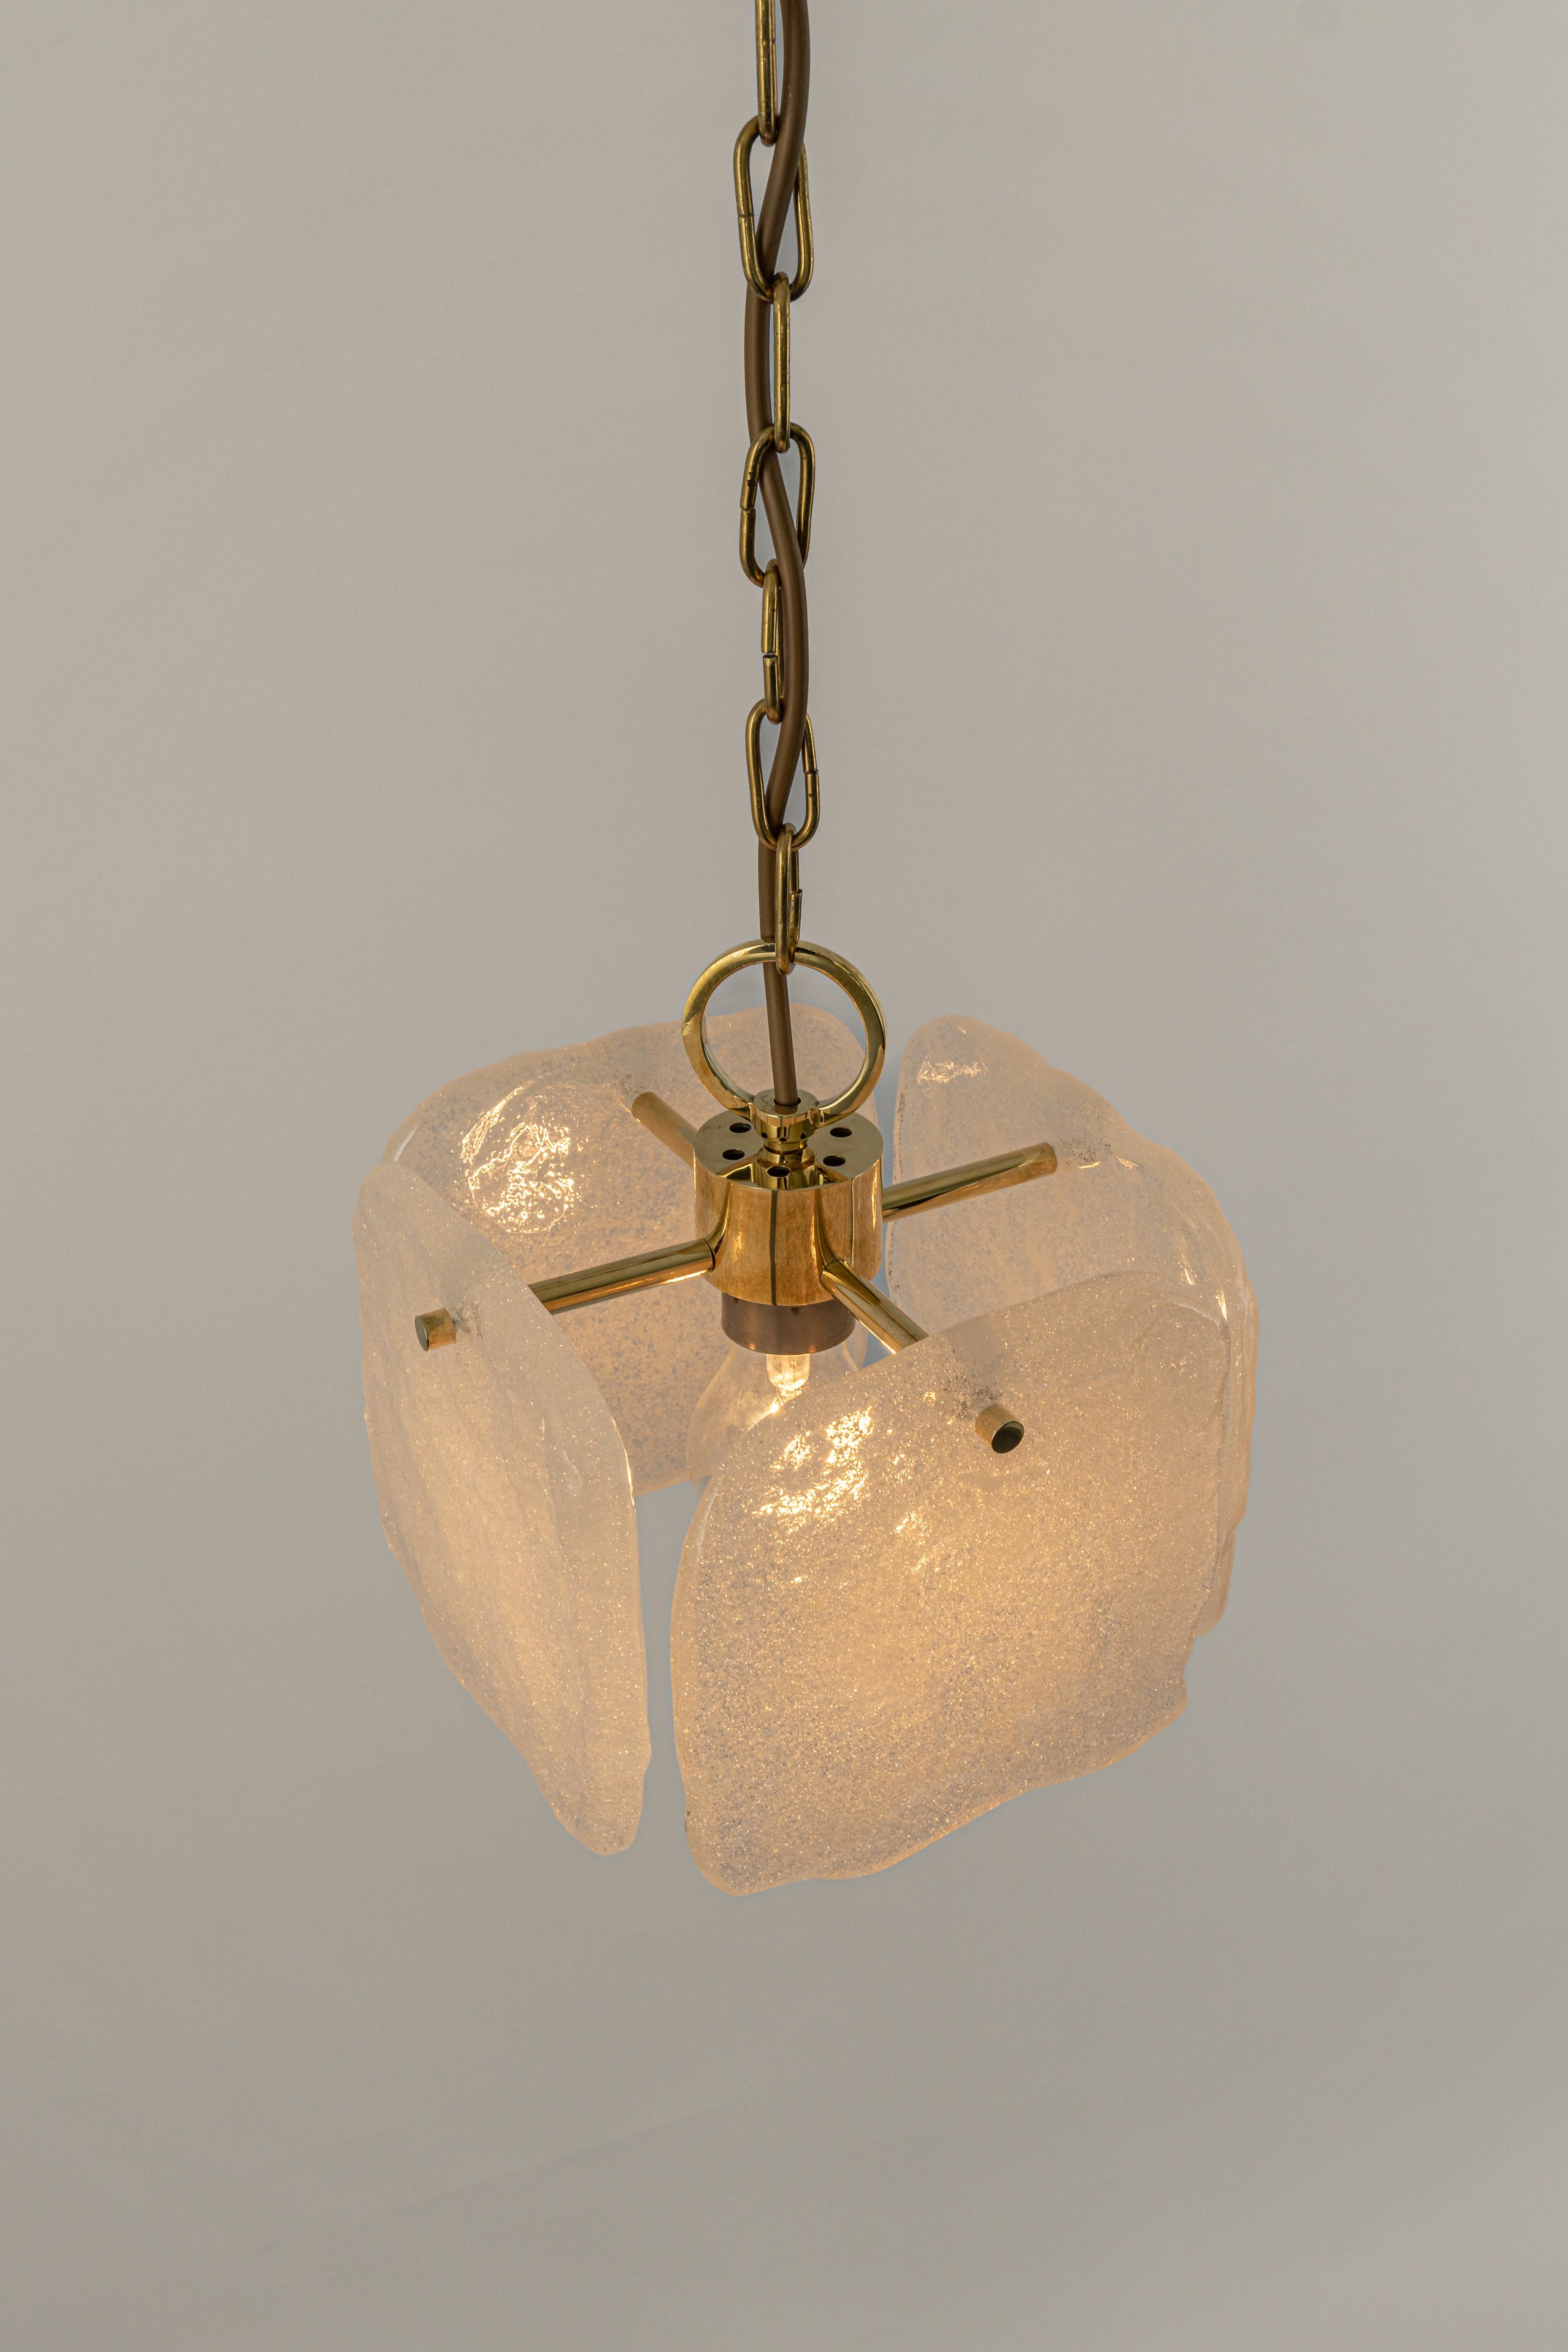 1 of 3 Petite Murano Glass Pendant Light by Kalmar, Germany, 1960s For Sale 6